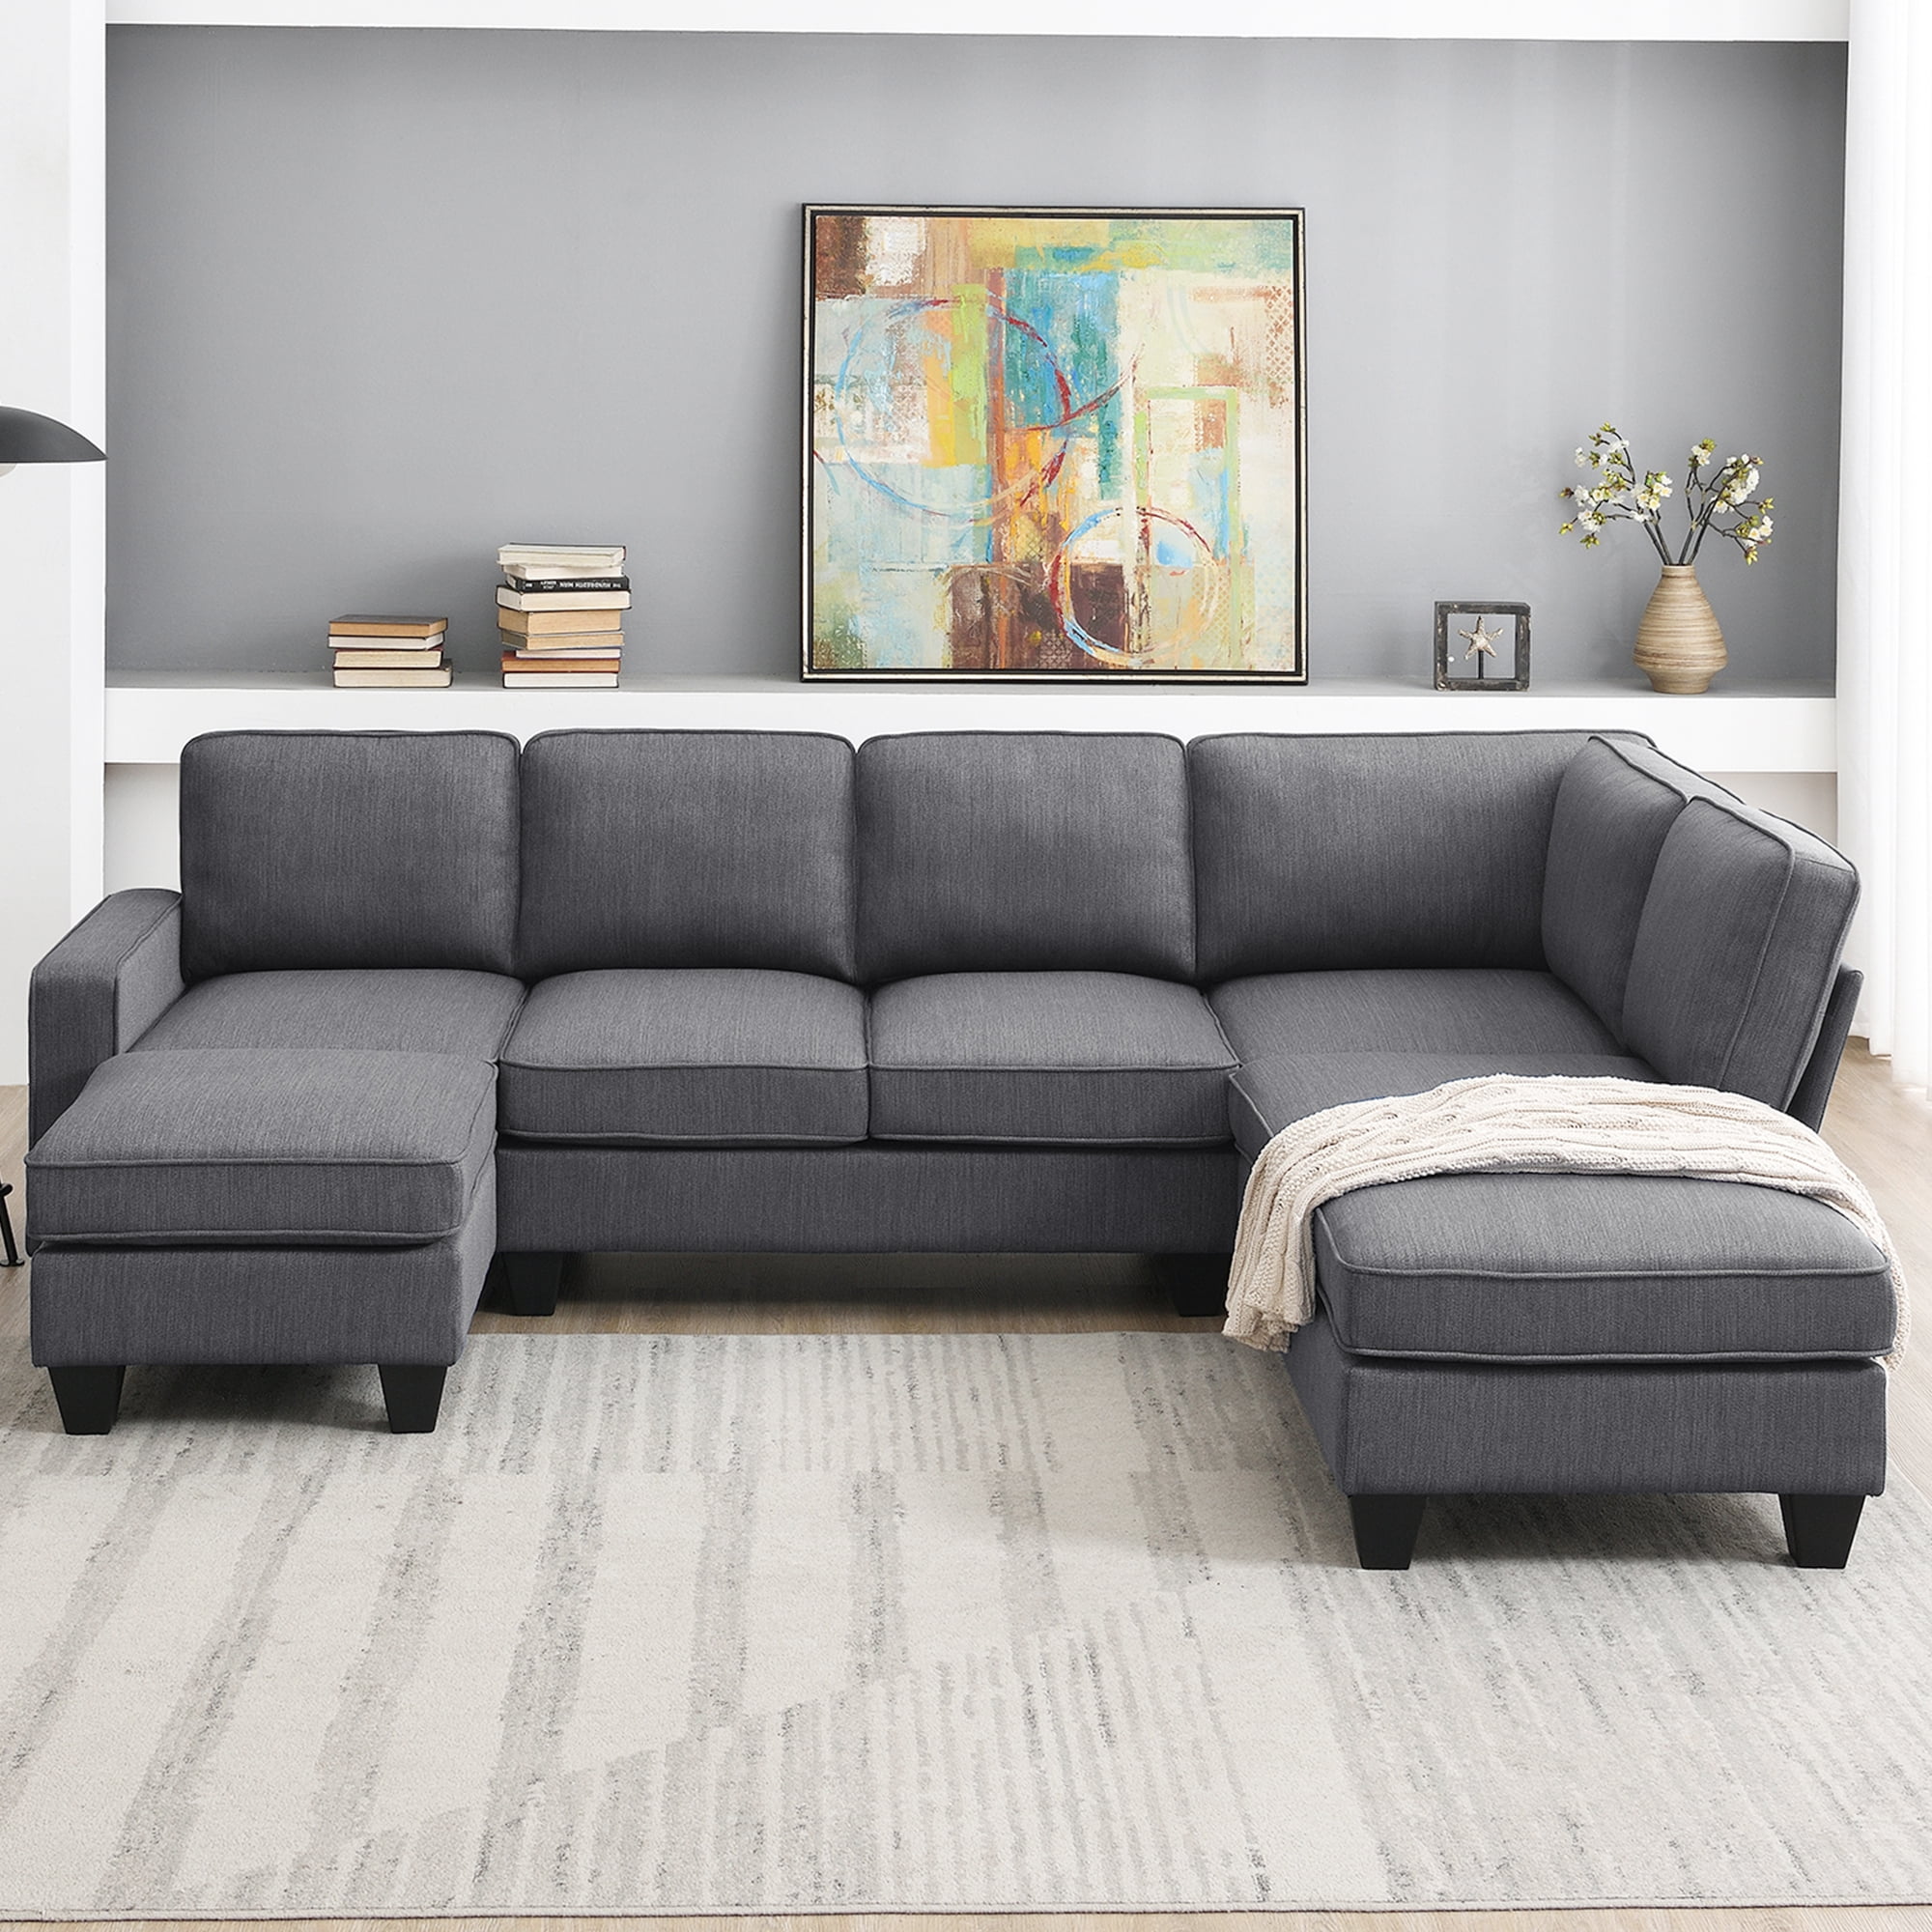 Euroco Modern L Shaped Sofa 7 Seat Sectional Couch Set With Chaise Lounge And Ottoman For Living Room Apartment Office Dark Gray 104 X 78 Com